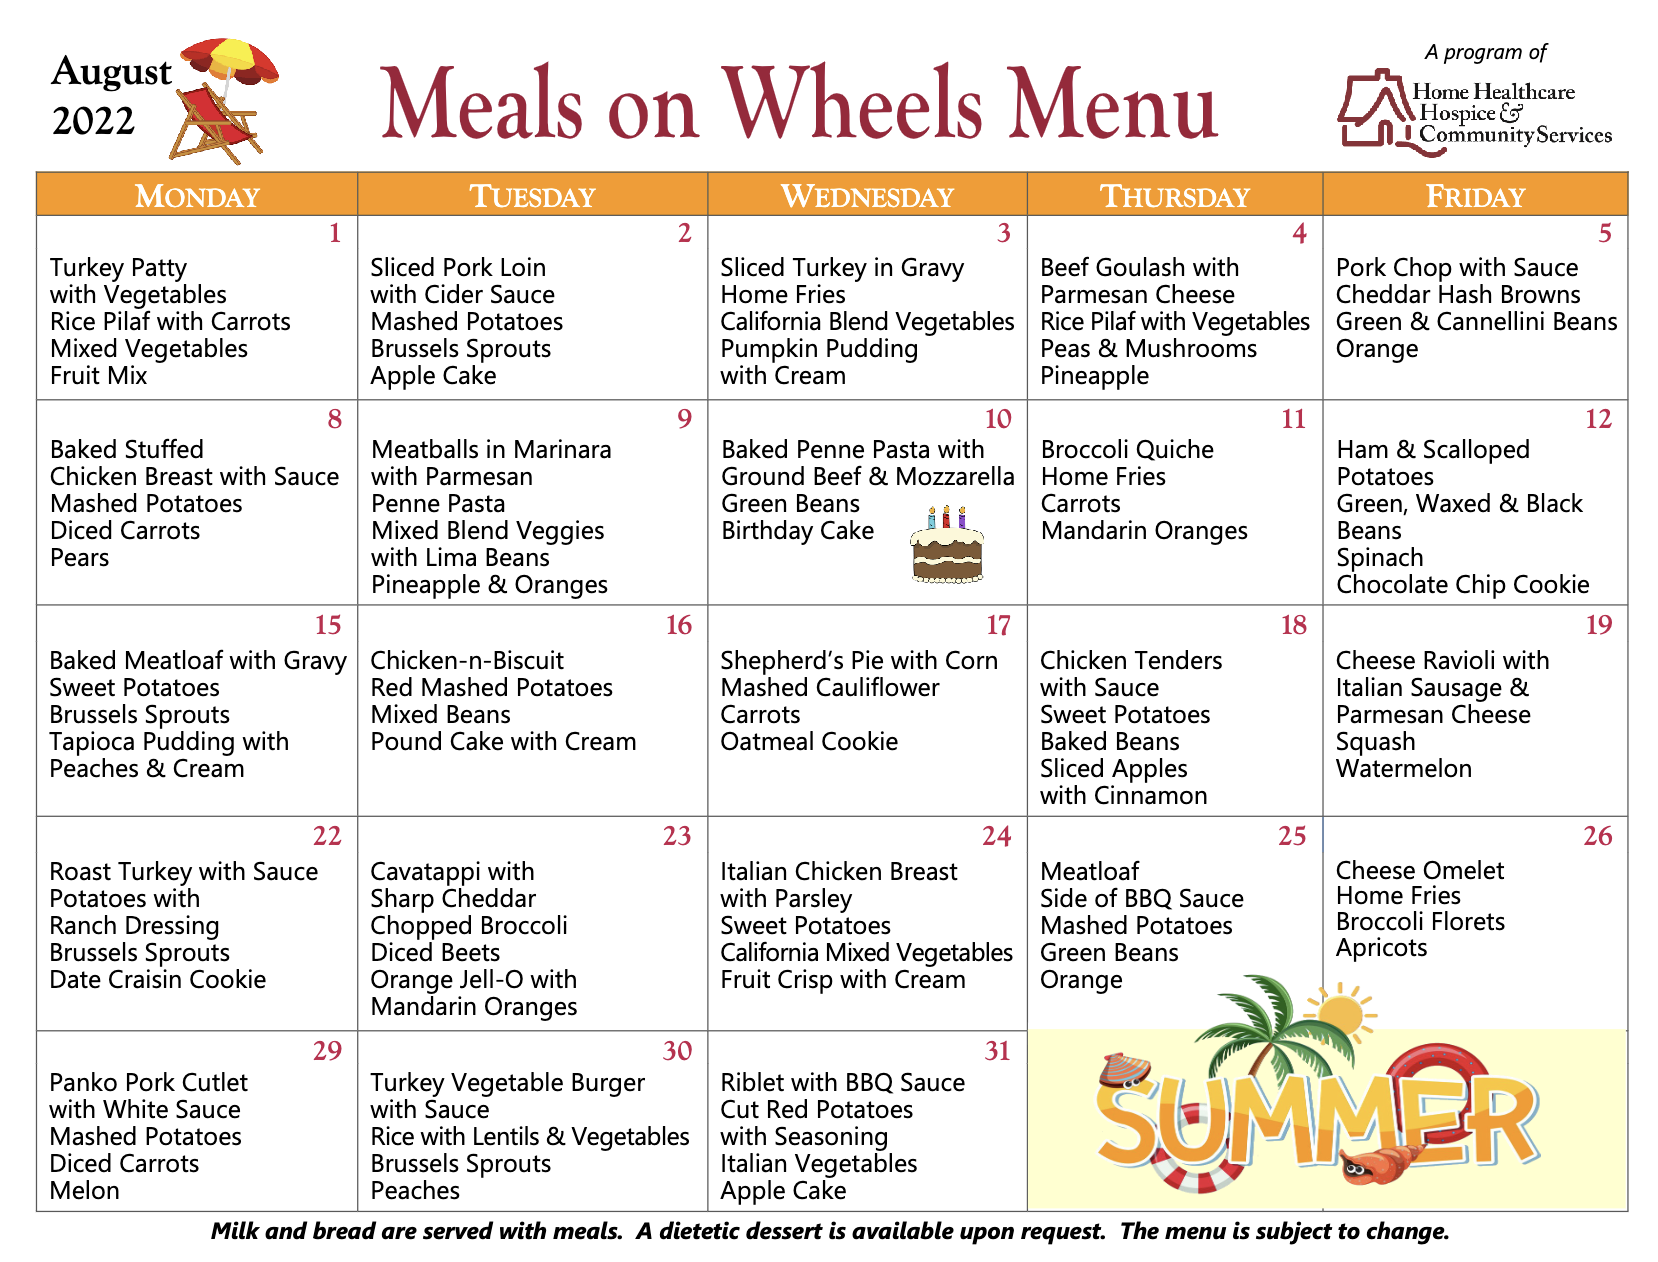 Meals On Wheels Menu for August 2022